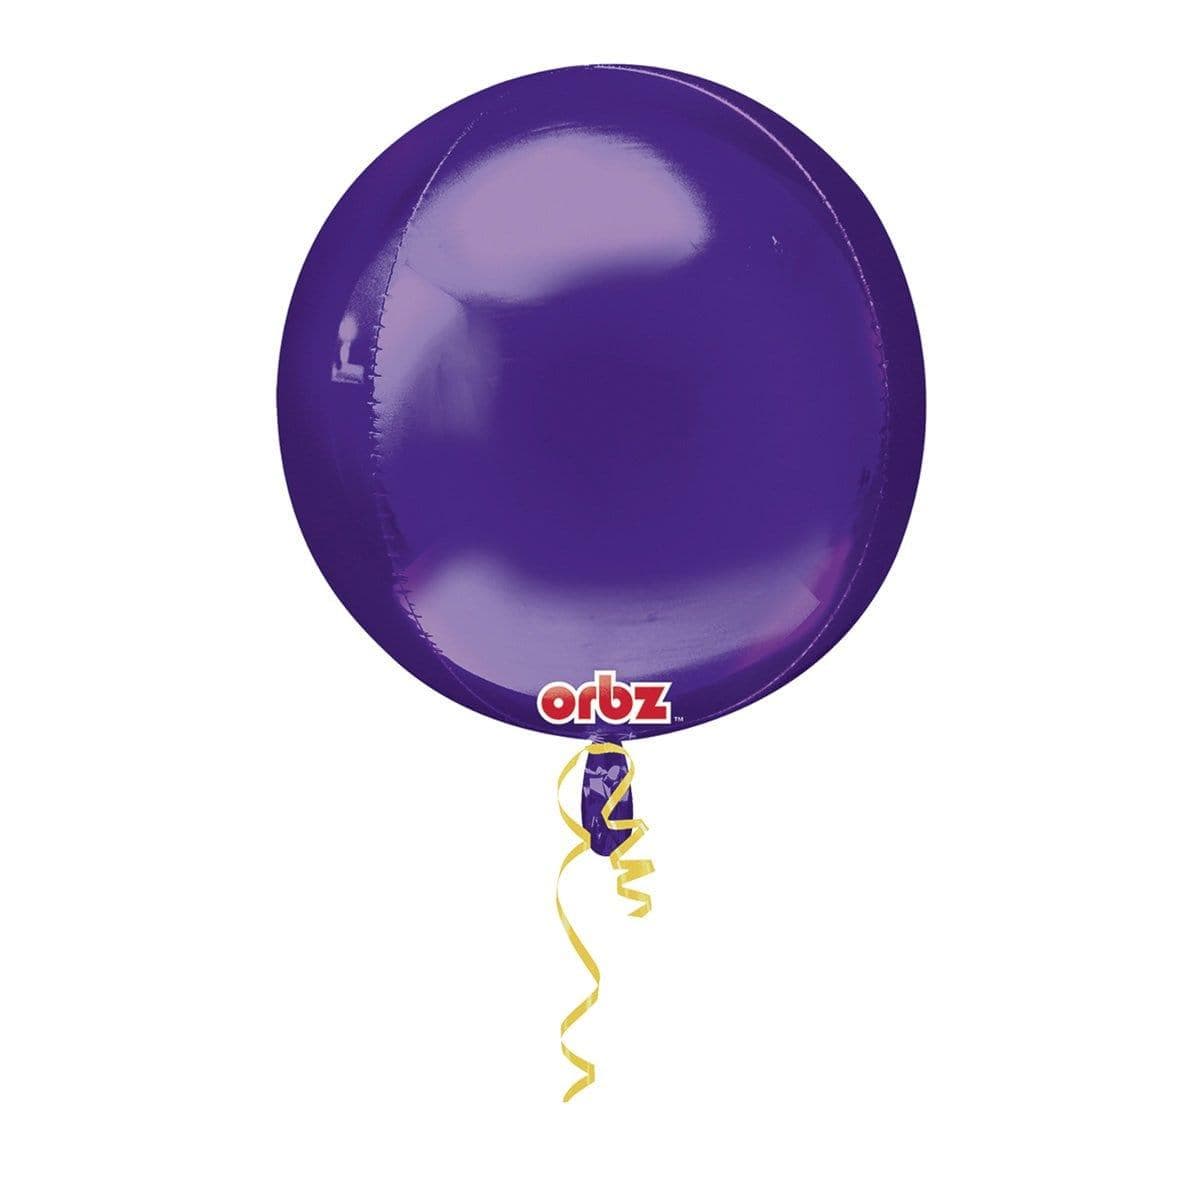 Buy Balloons Purple Orbz Balloon, 16 Inches sold at Party Expert